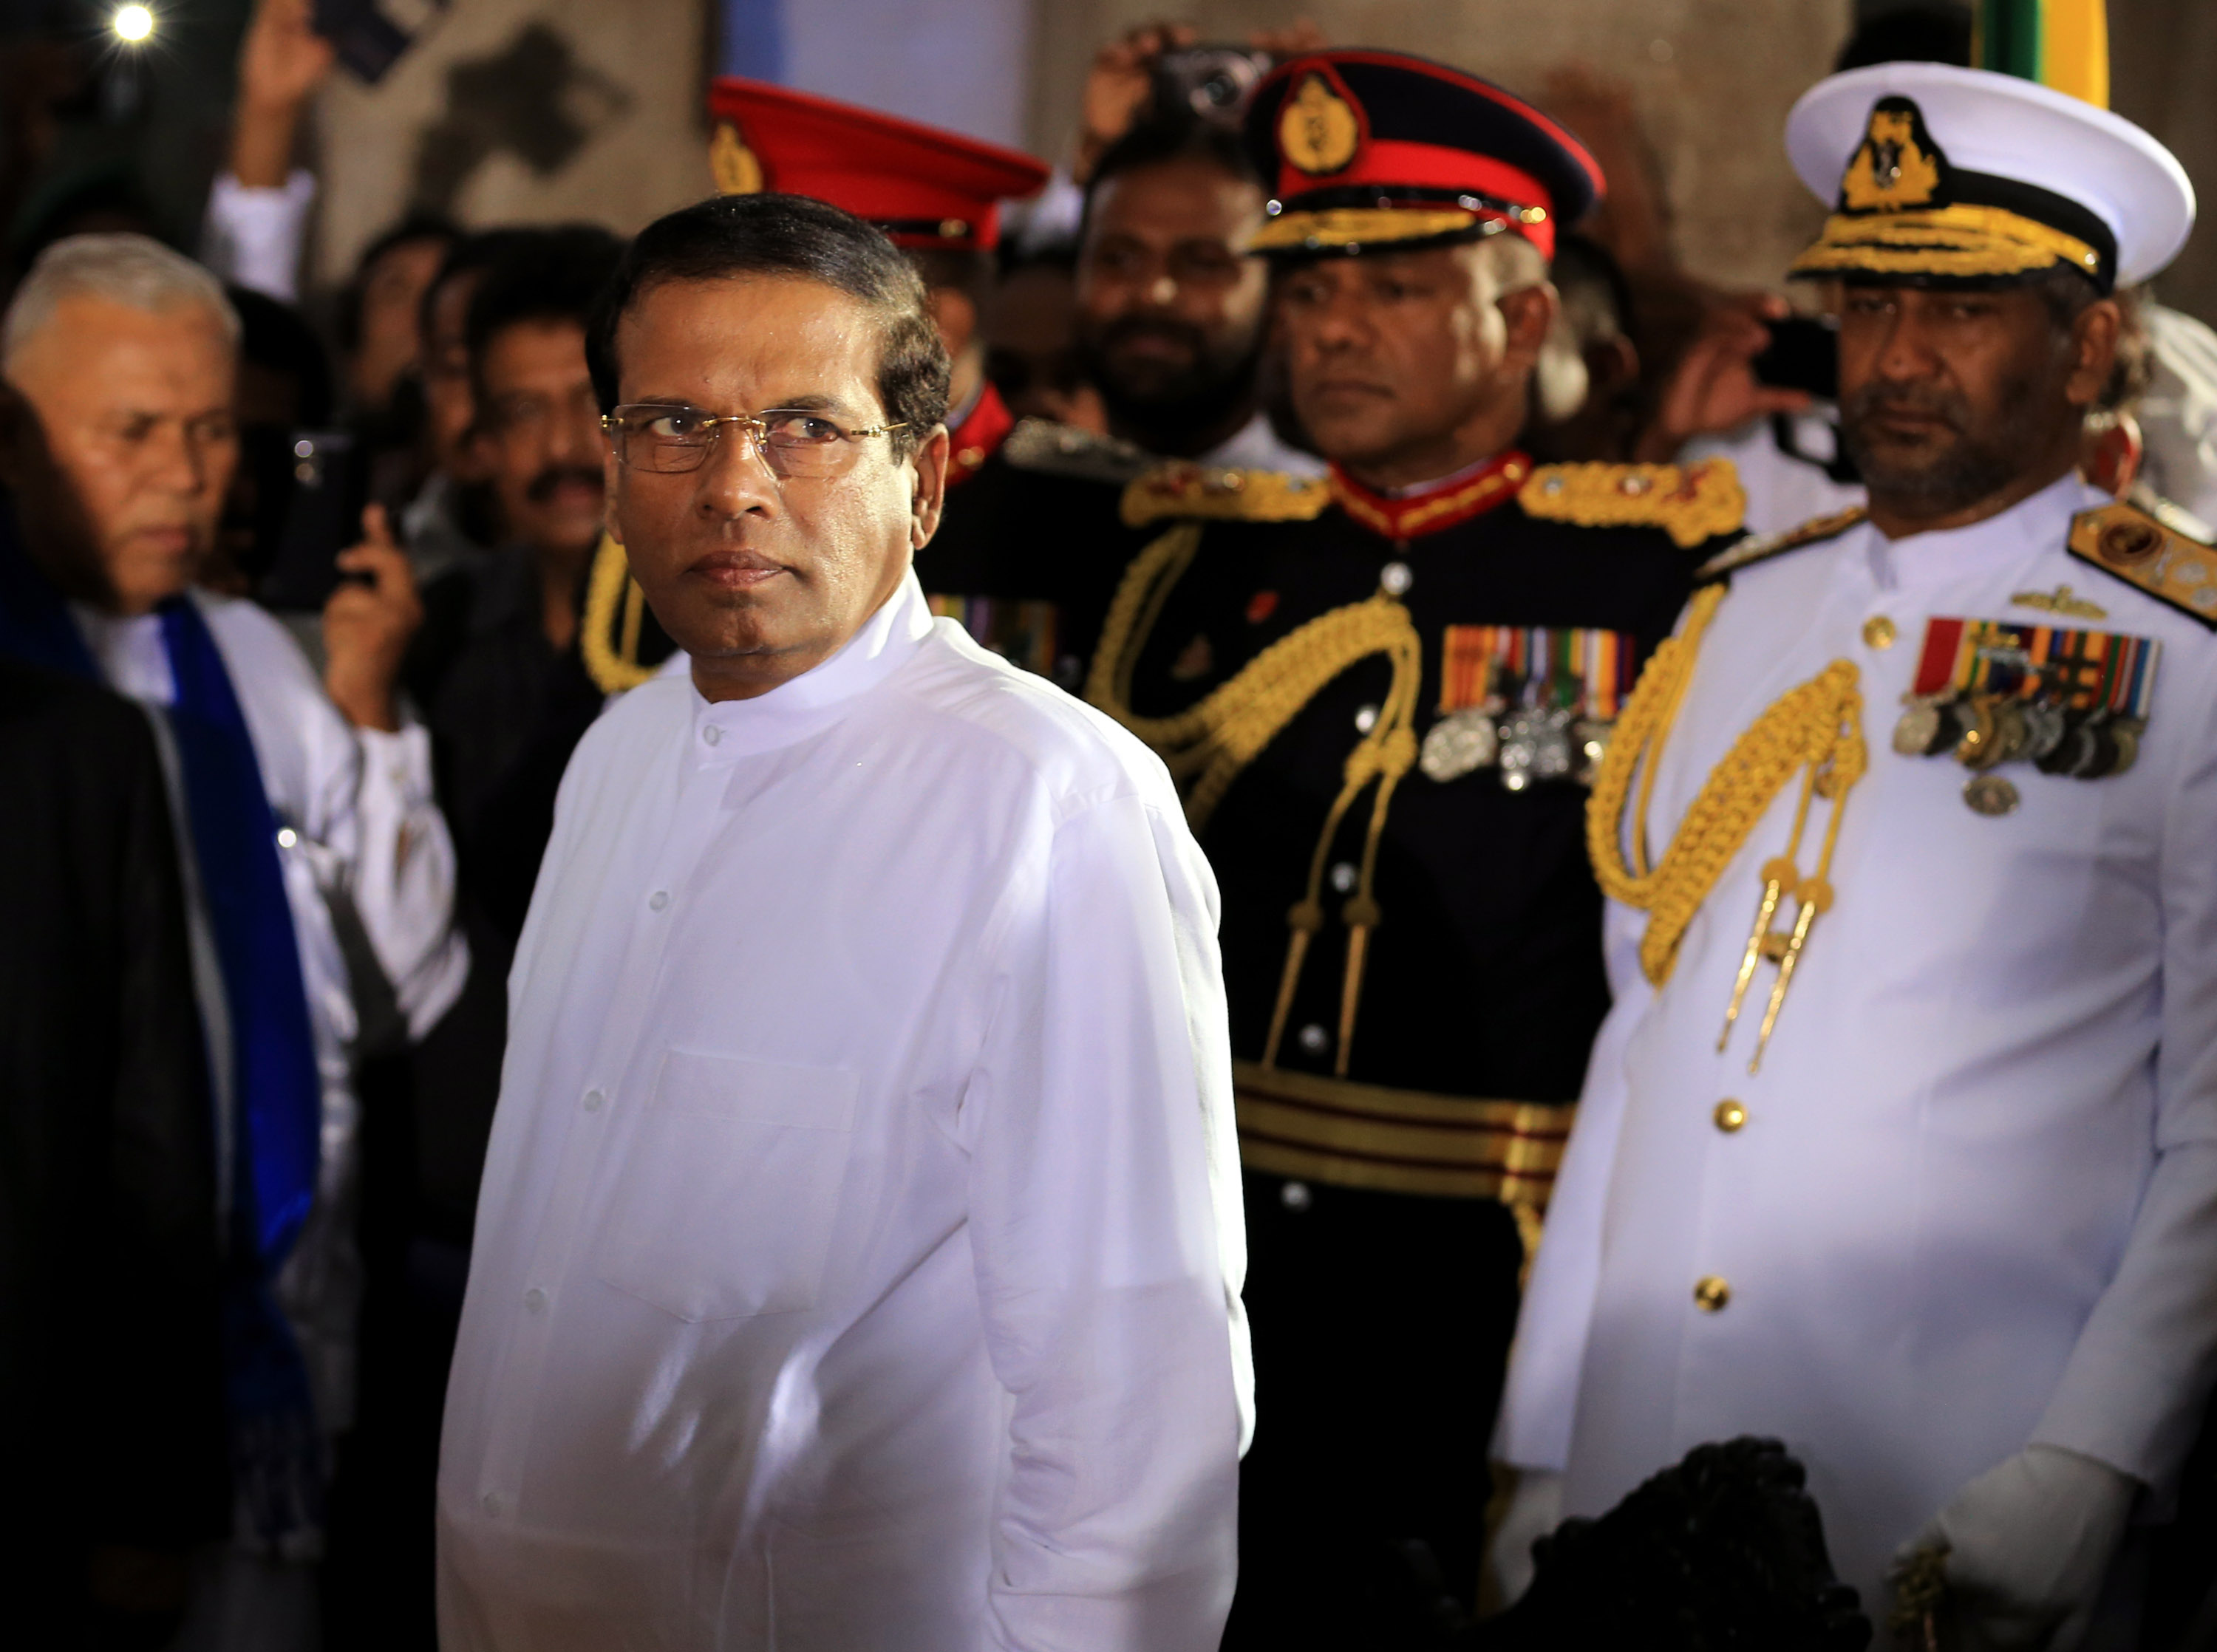 Sri Lanka's newly elected president Maithripala Sirisena (C) prepares to take oath as he is sworn in at Independence Square in Colombo on January 9, 2015 in Colombo, Sri Lanka. (Buddhika Weerasinghe—Getty Images)